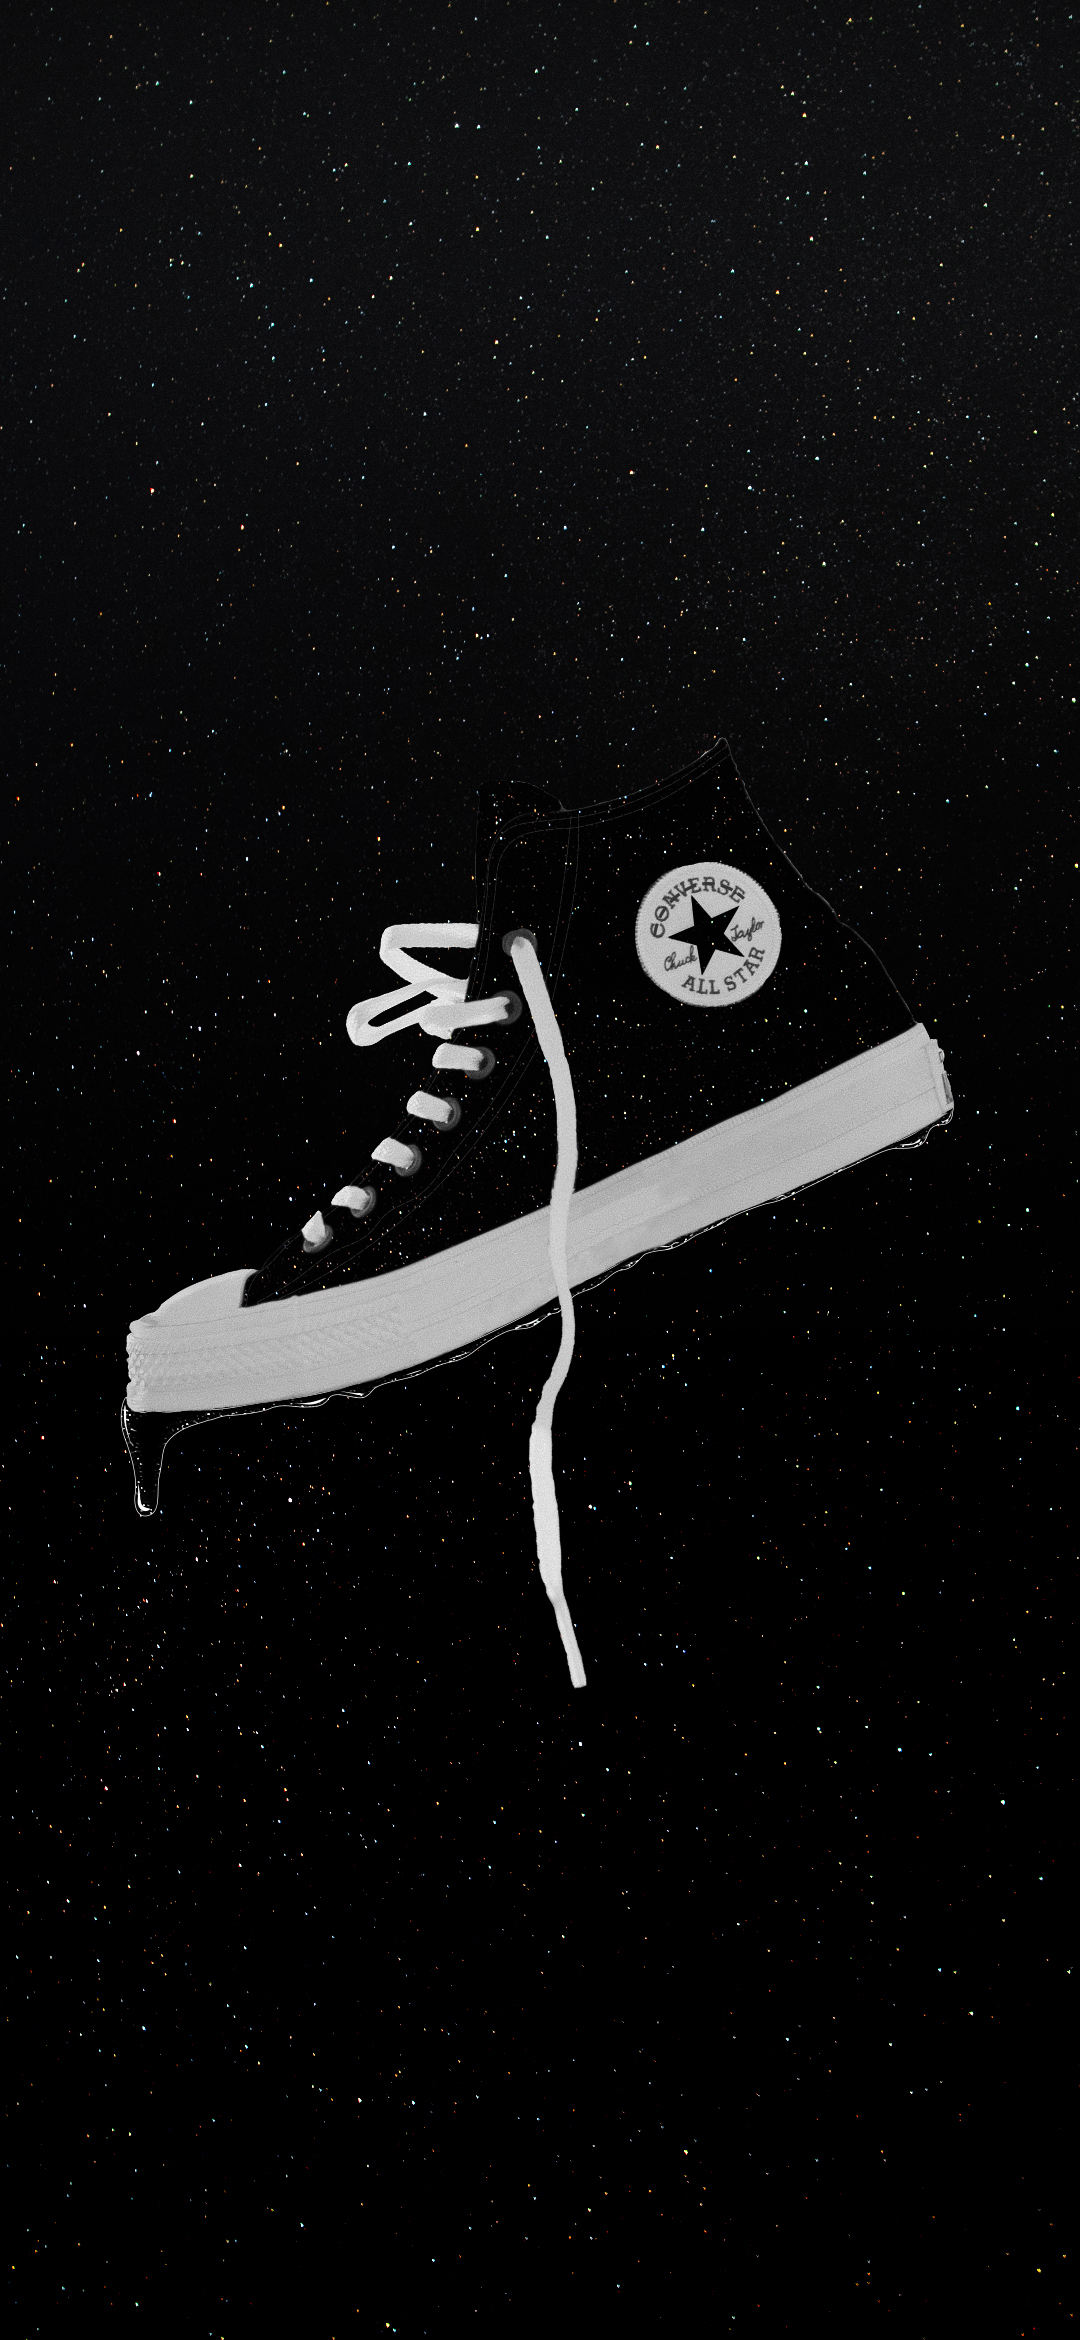 products, converse, shoe, stars